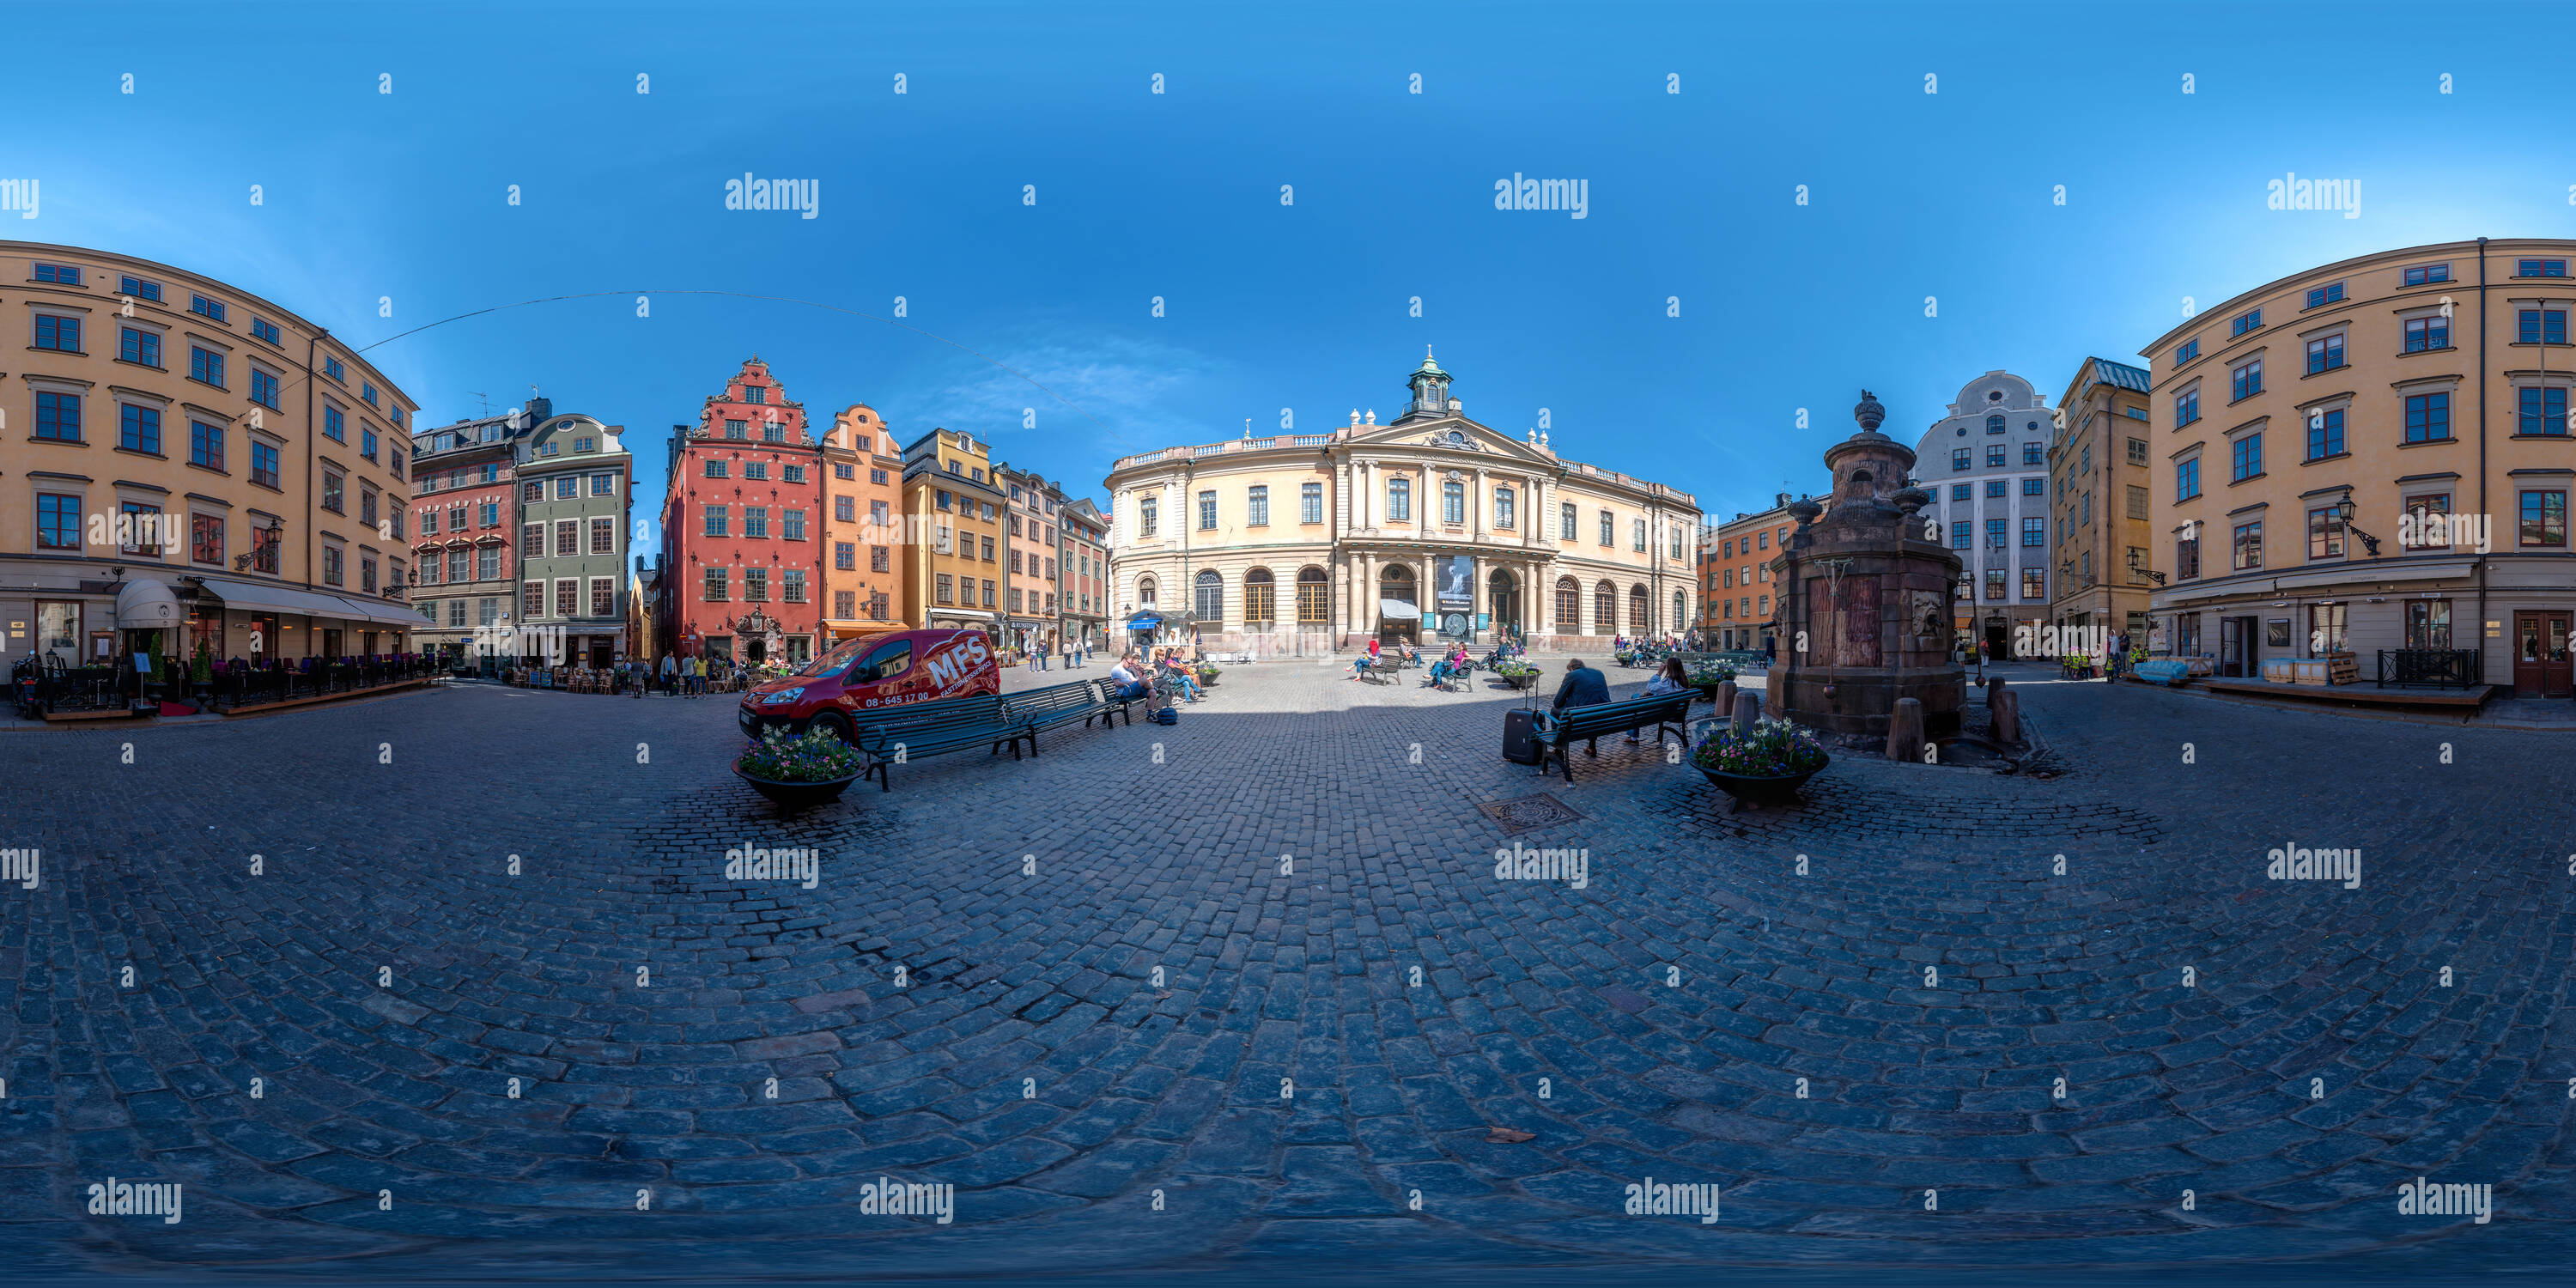 360 degree panoramic view of The Nobel Museum, Stockholm, Sweden